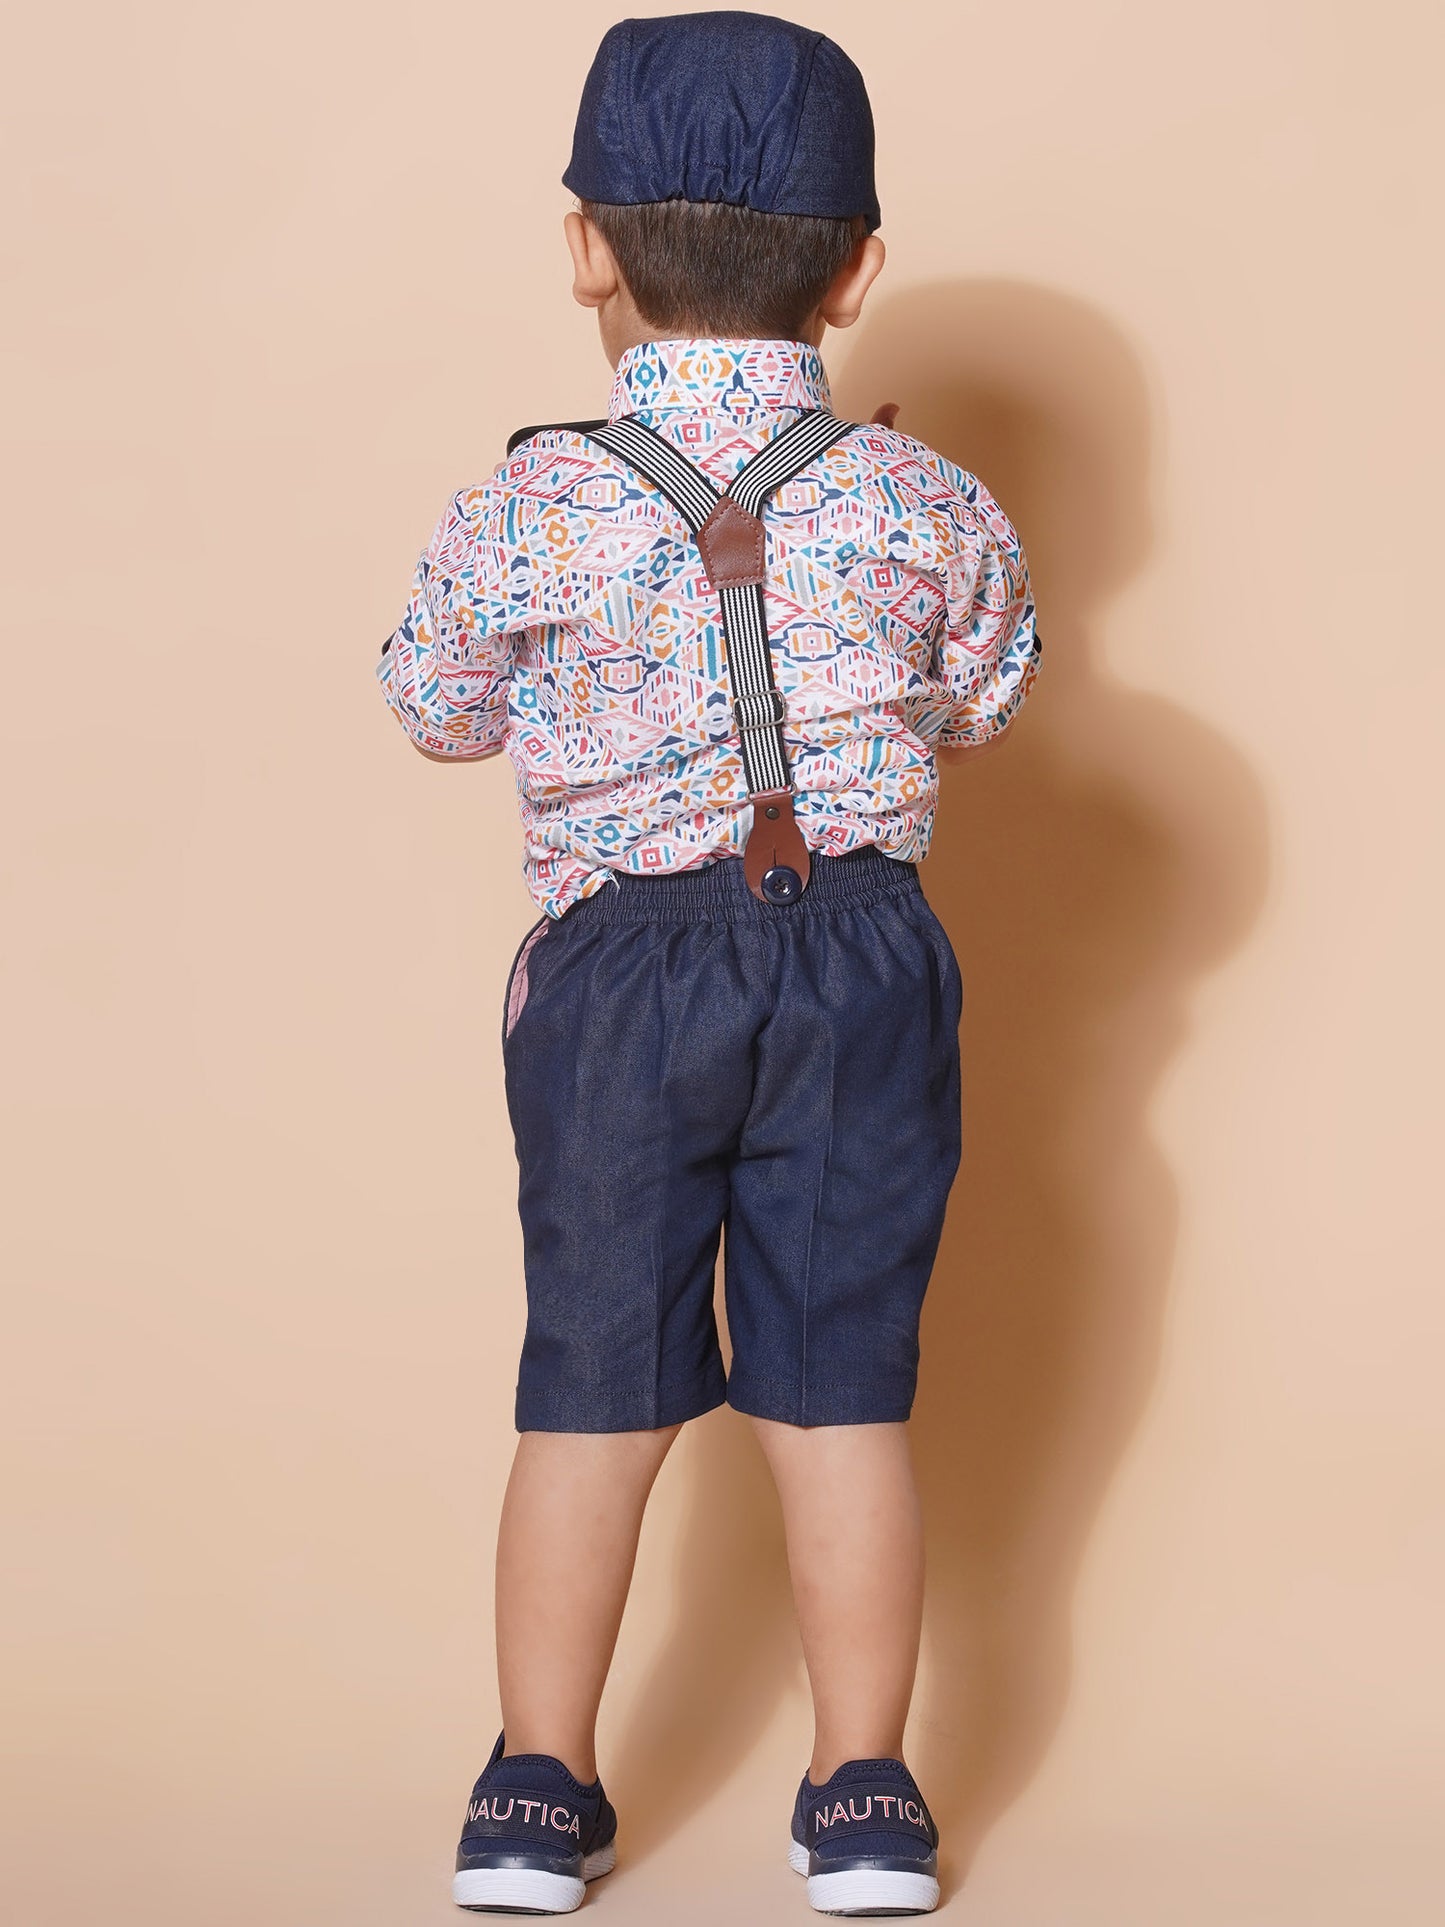 Boys Kids Pink Cotton Printed Shirt Shorts With Cap and Suspender Set